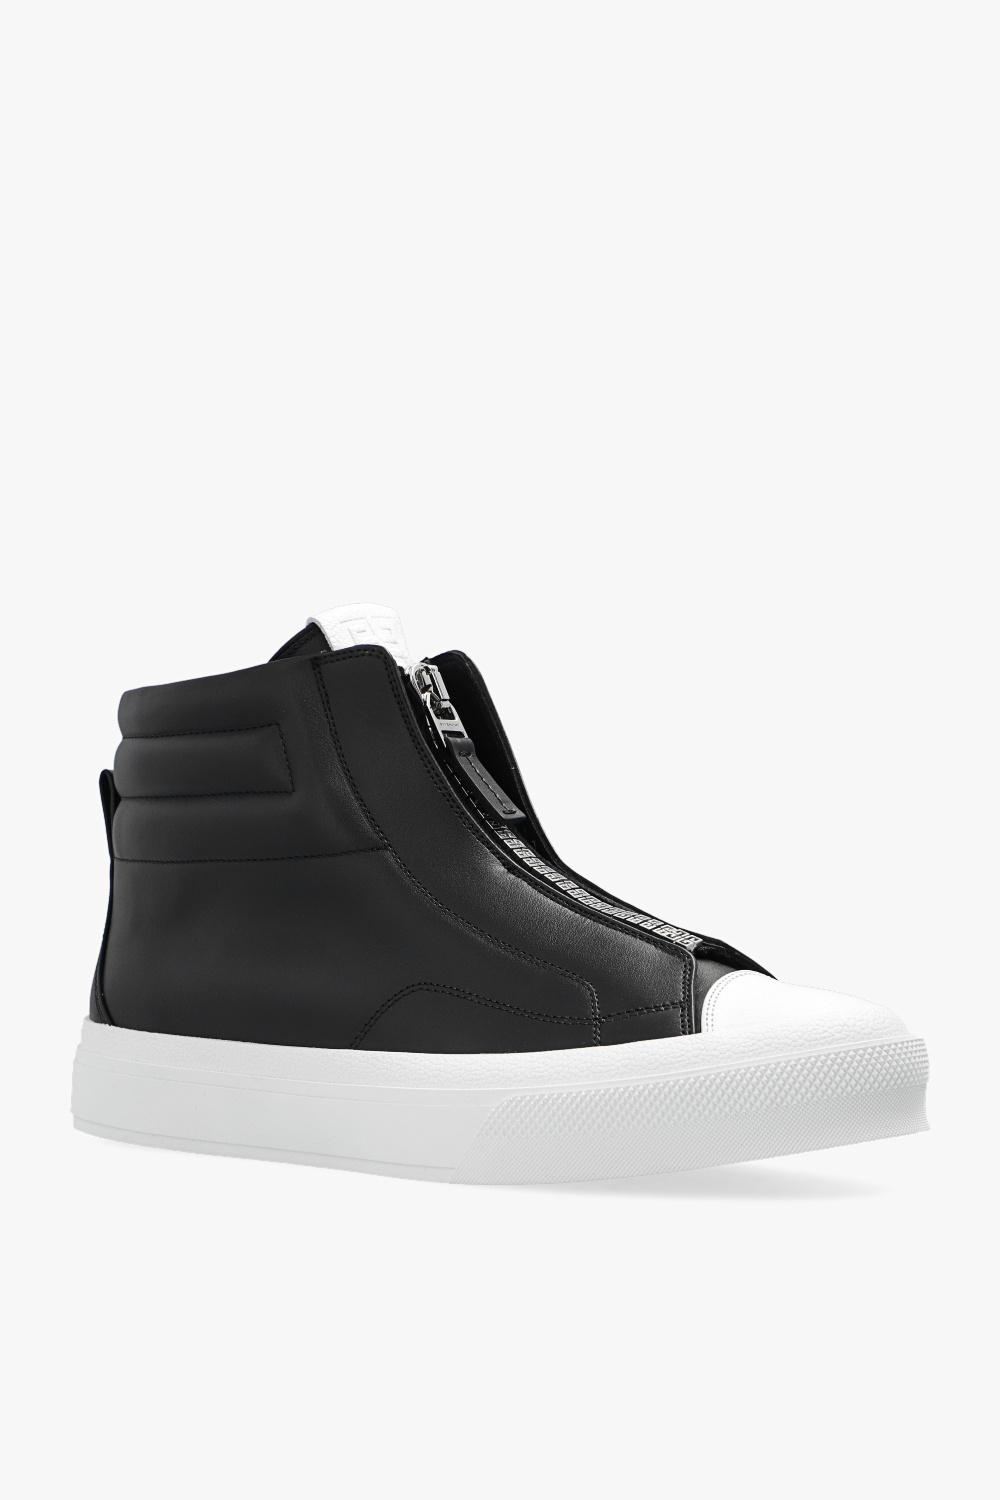 Givenchy 'City' high-top sneakers | Men's Shoes | Vitkac